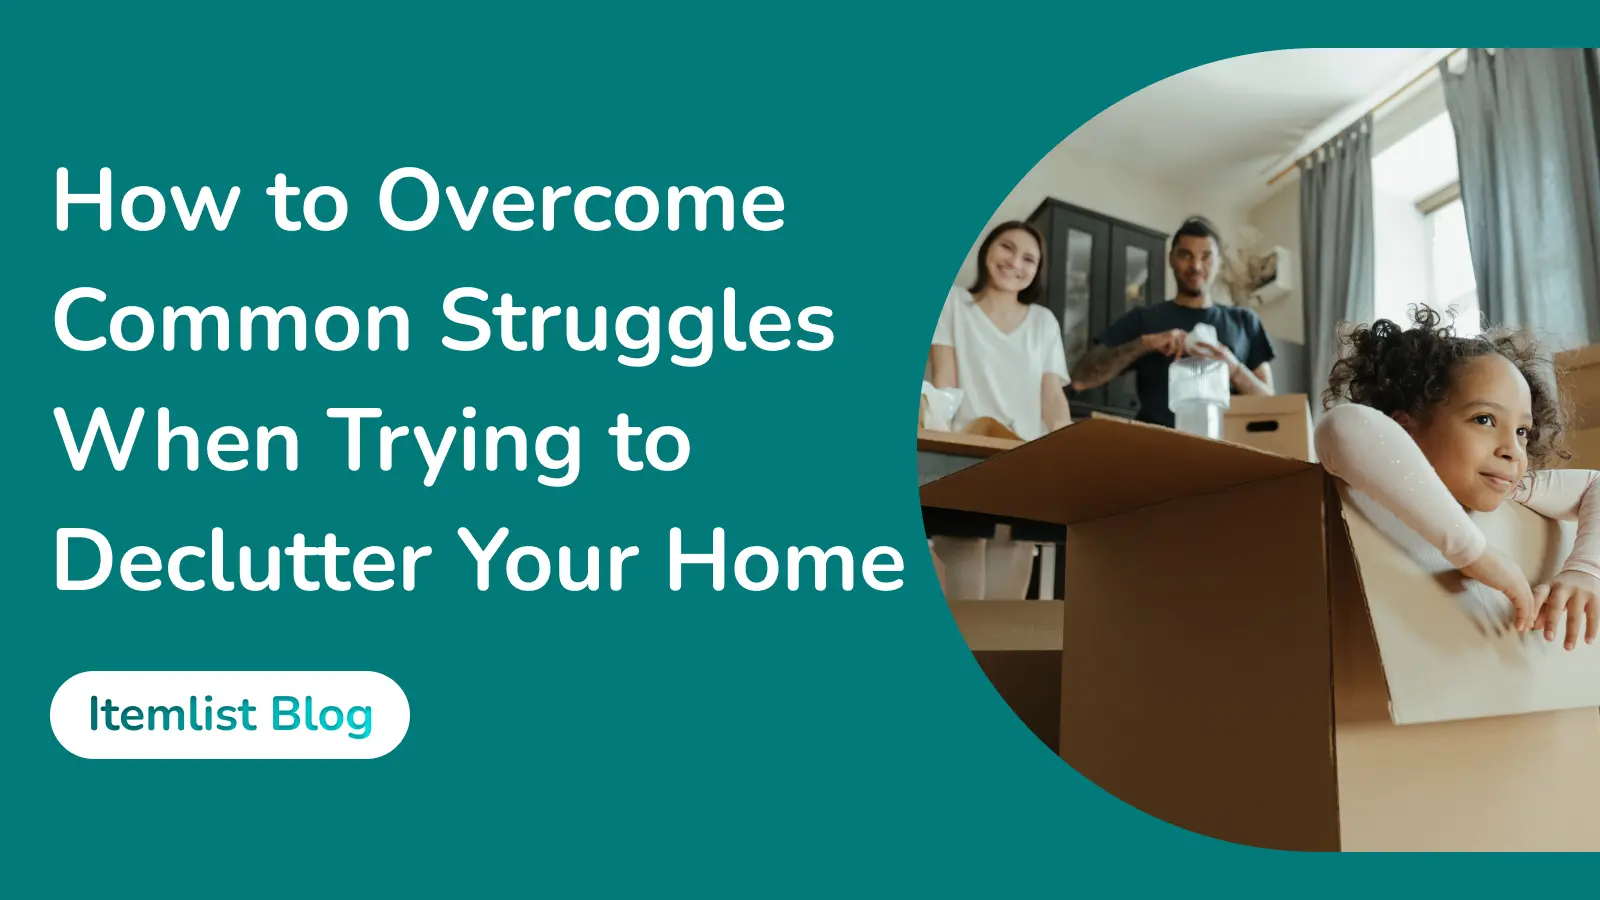 How to Overcome Common Struggles When Trying to Declutter Your Home (Tips and Tricks)